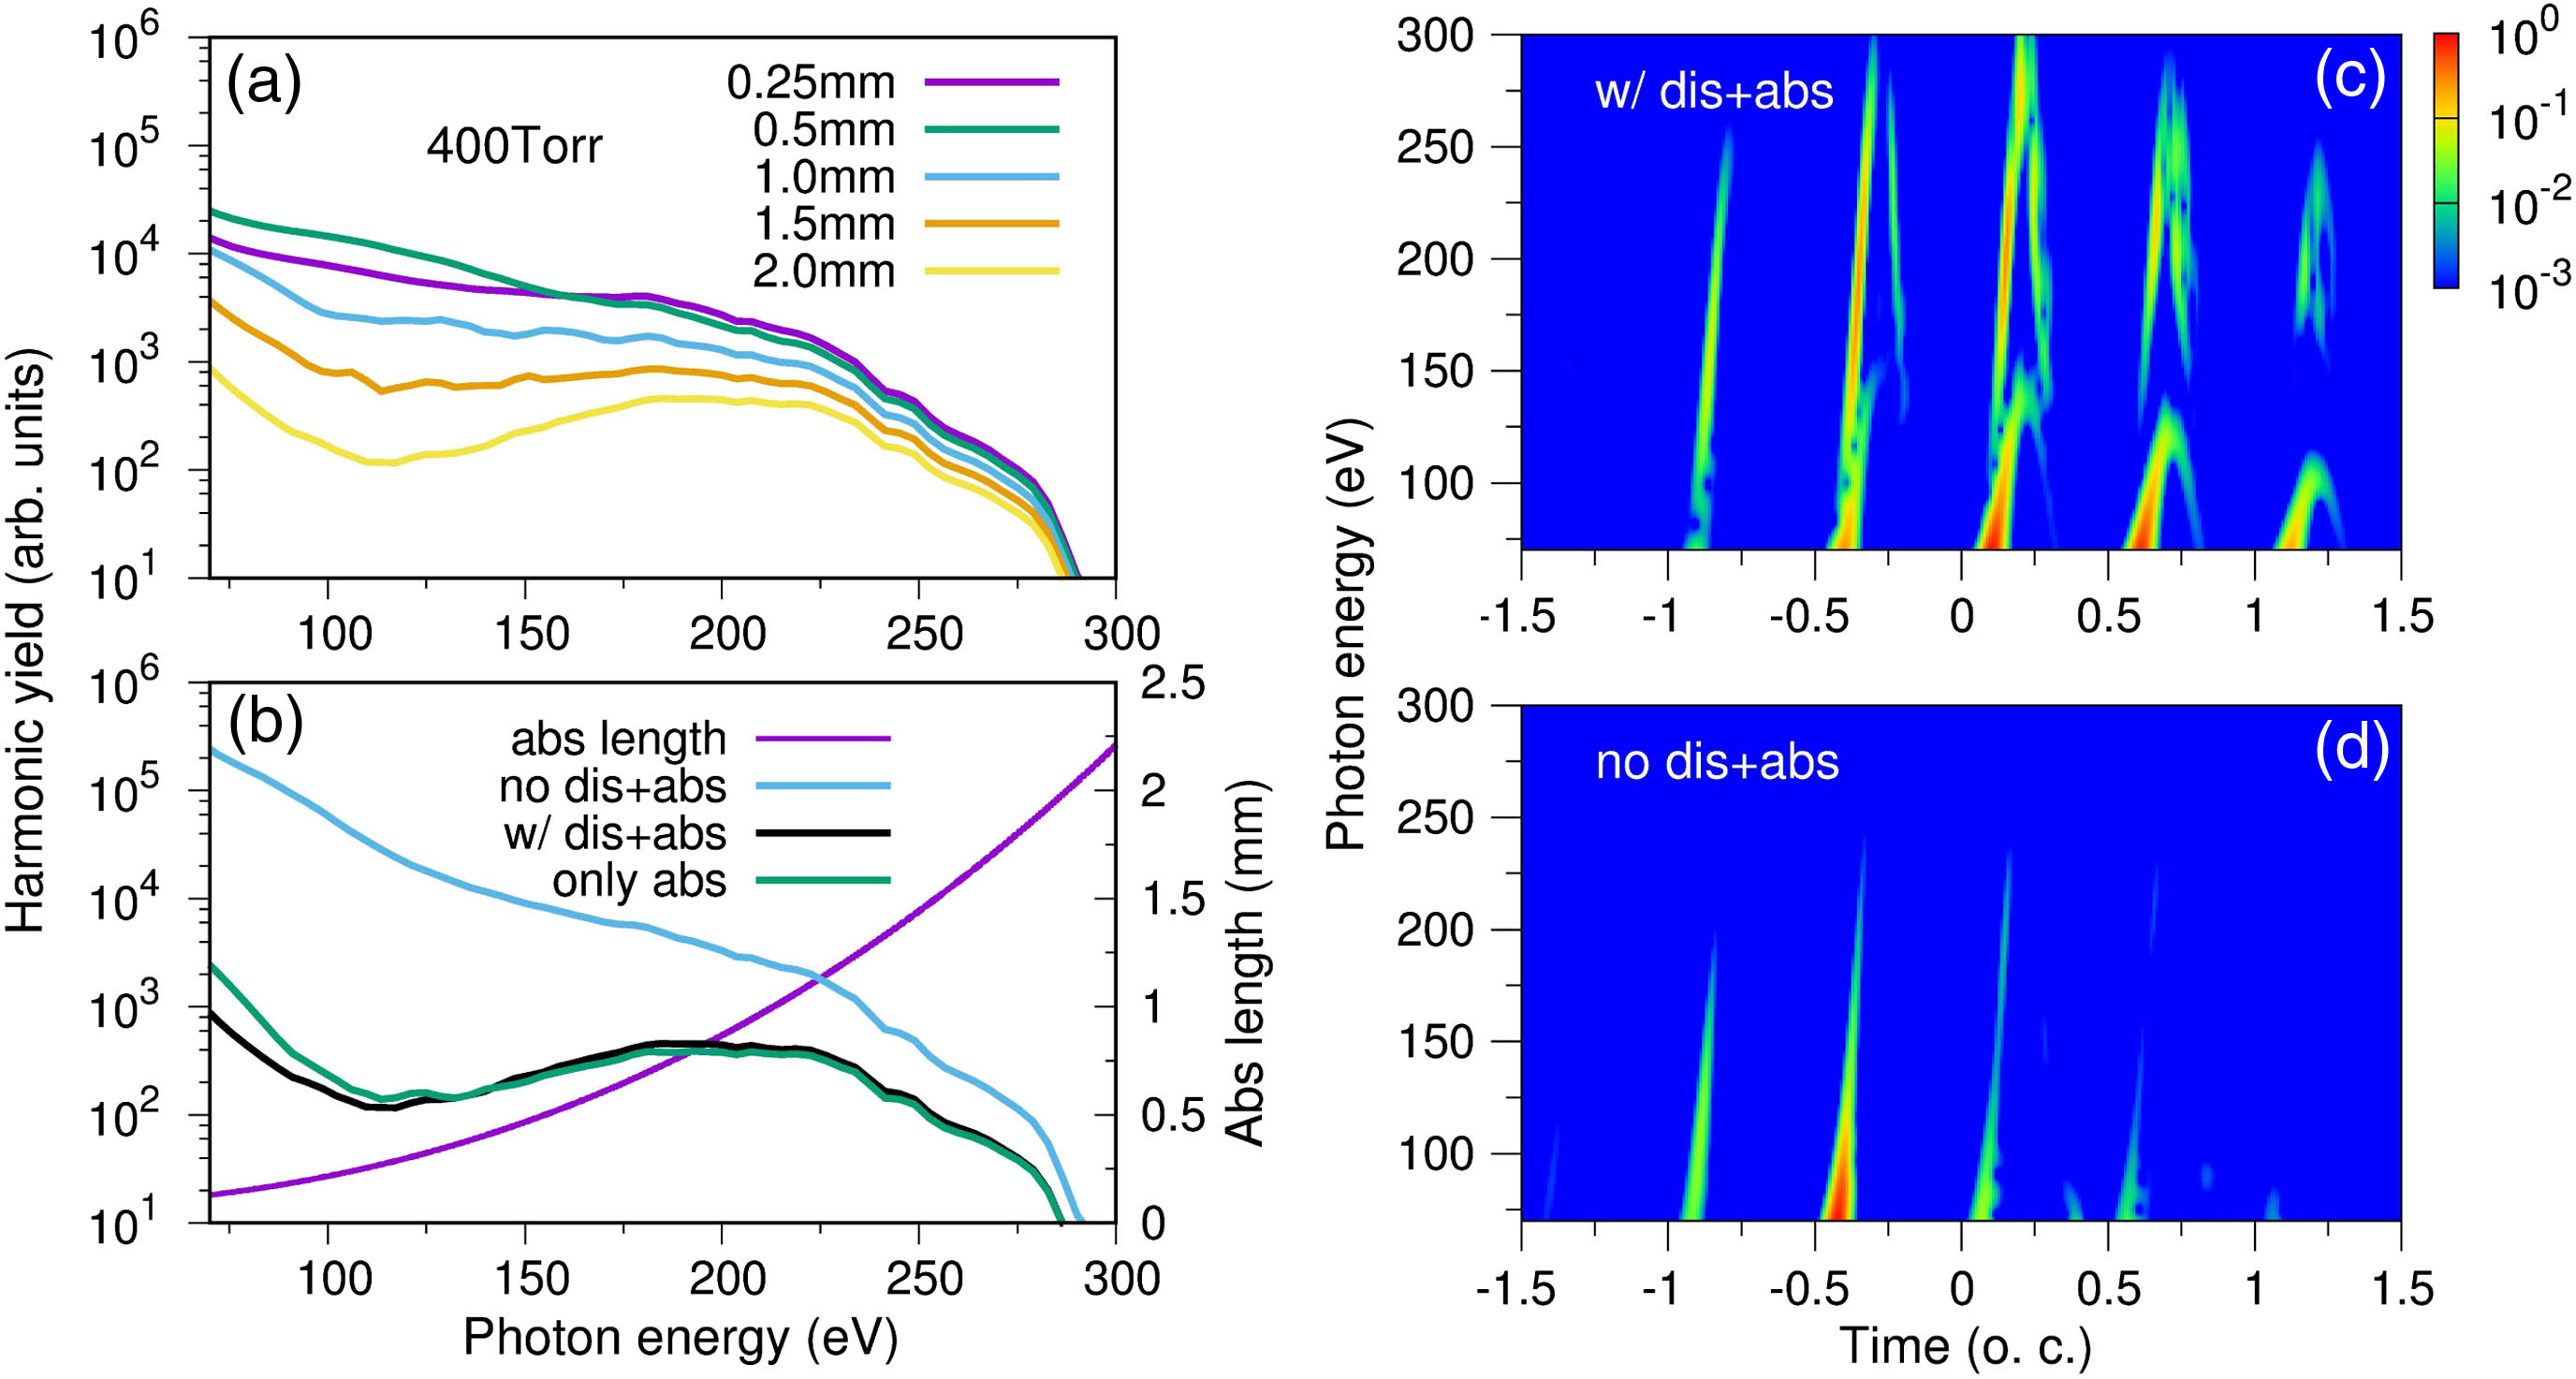 (a) Evolution of harmonic spectra against the propagation distance by a two-color laser pulse at the gas pressure of 400 Torr. The propagation distances are as indicated. (b) The harmonic spectrum at the exit of the gas cell calculated including both dispersion and absorption effects (w/dis+abs) is compared with calculations where only absorption (only abs) is included, and with calculations where neither absorption nor dispersion (no dis+abs) is included. The absorption length versus harmonic energy for gas pressure at 400 Torr from NIST [56] is also plotted (see right-hand scale). (c), (d) Time-frequency analysis of the harmonic emissions (normalized) at r=11 μm of the exit plane. The optical cycle (o.c.) is defined with respect to the fundamental 1.6-μm laser.